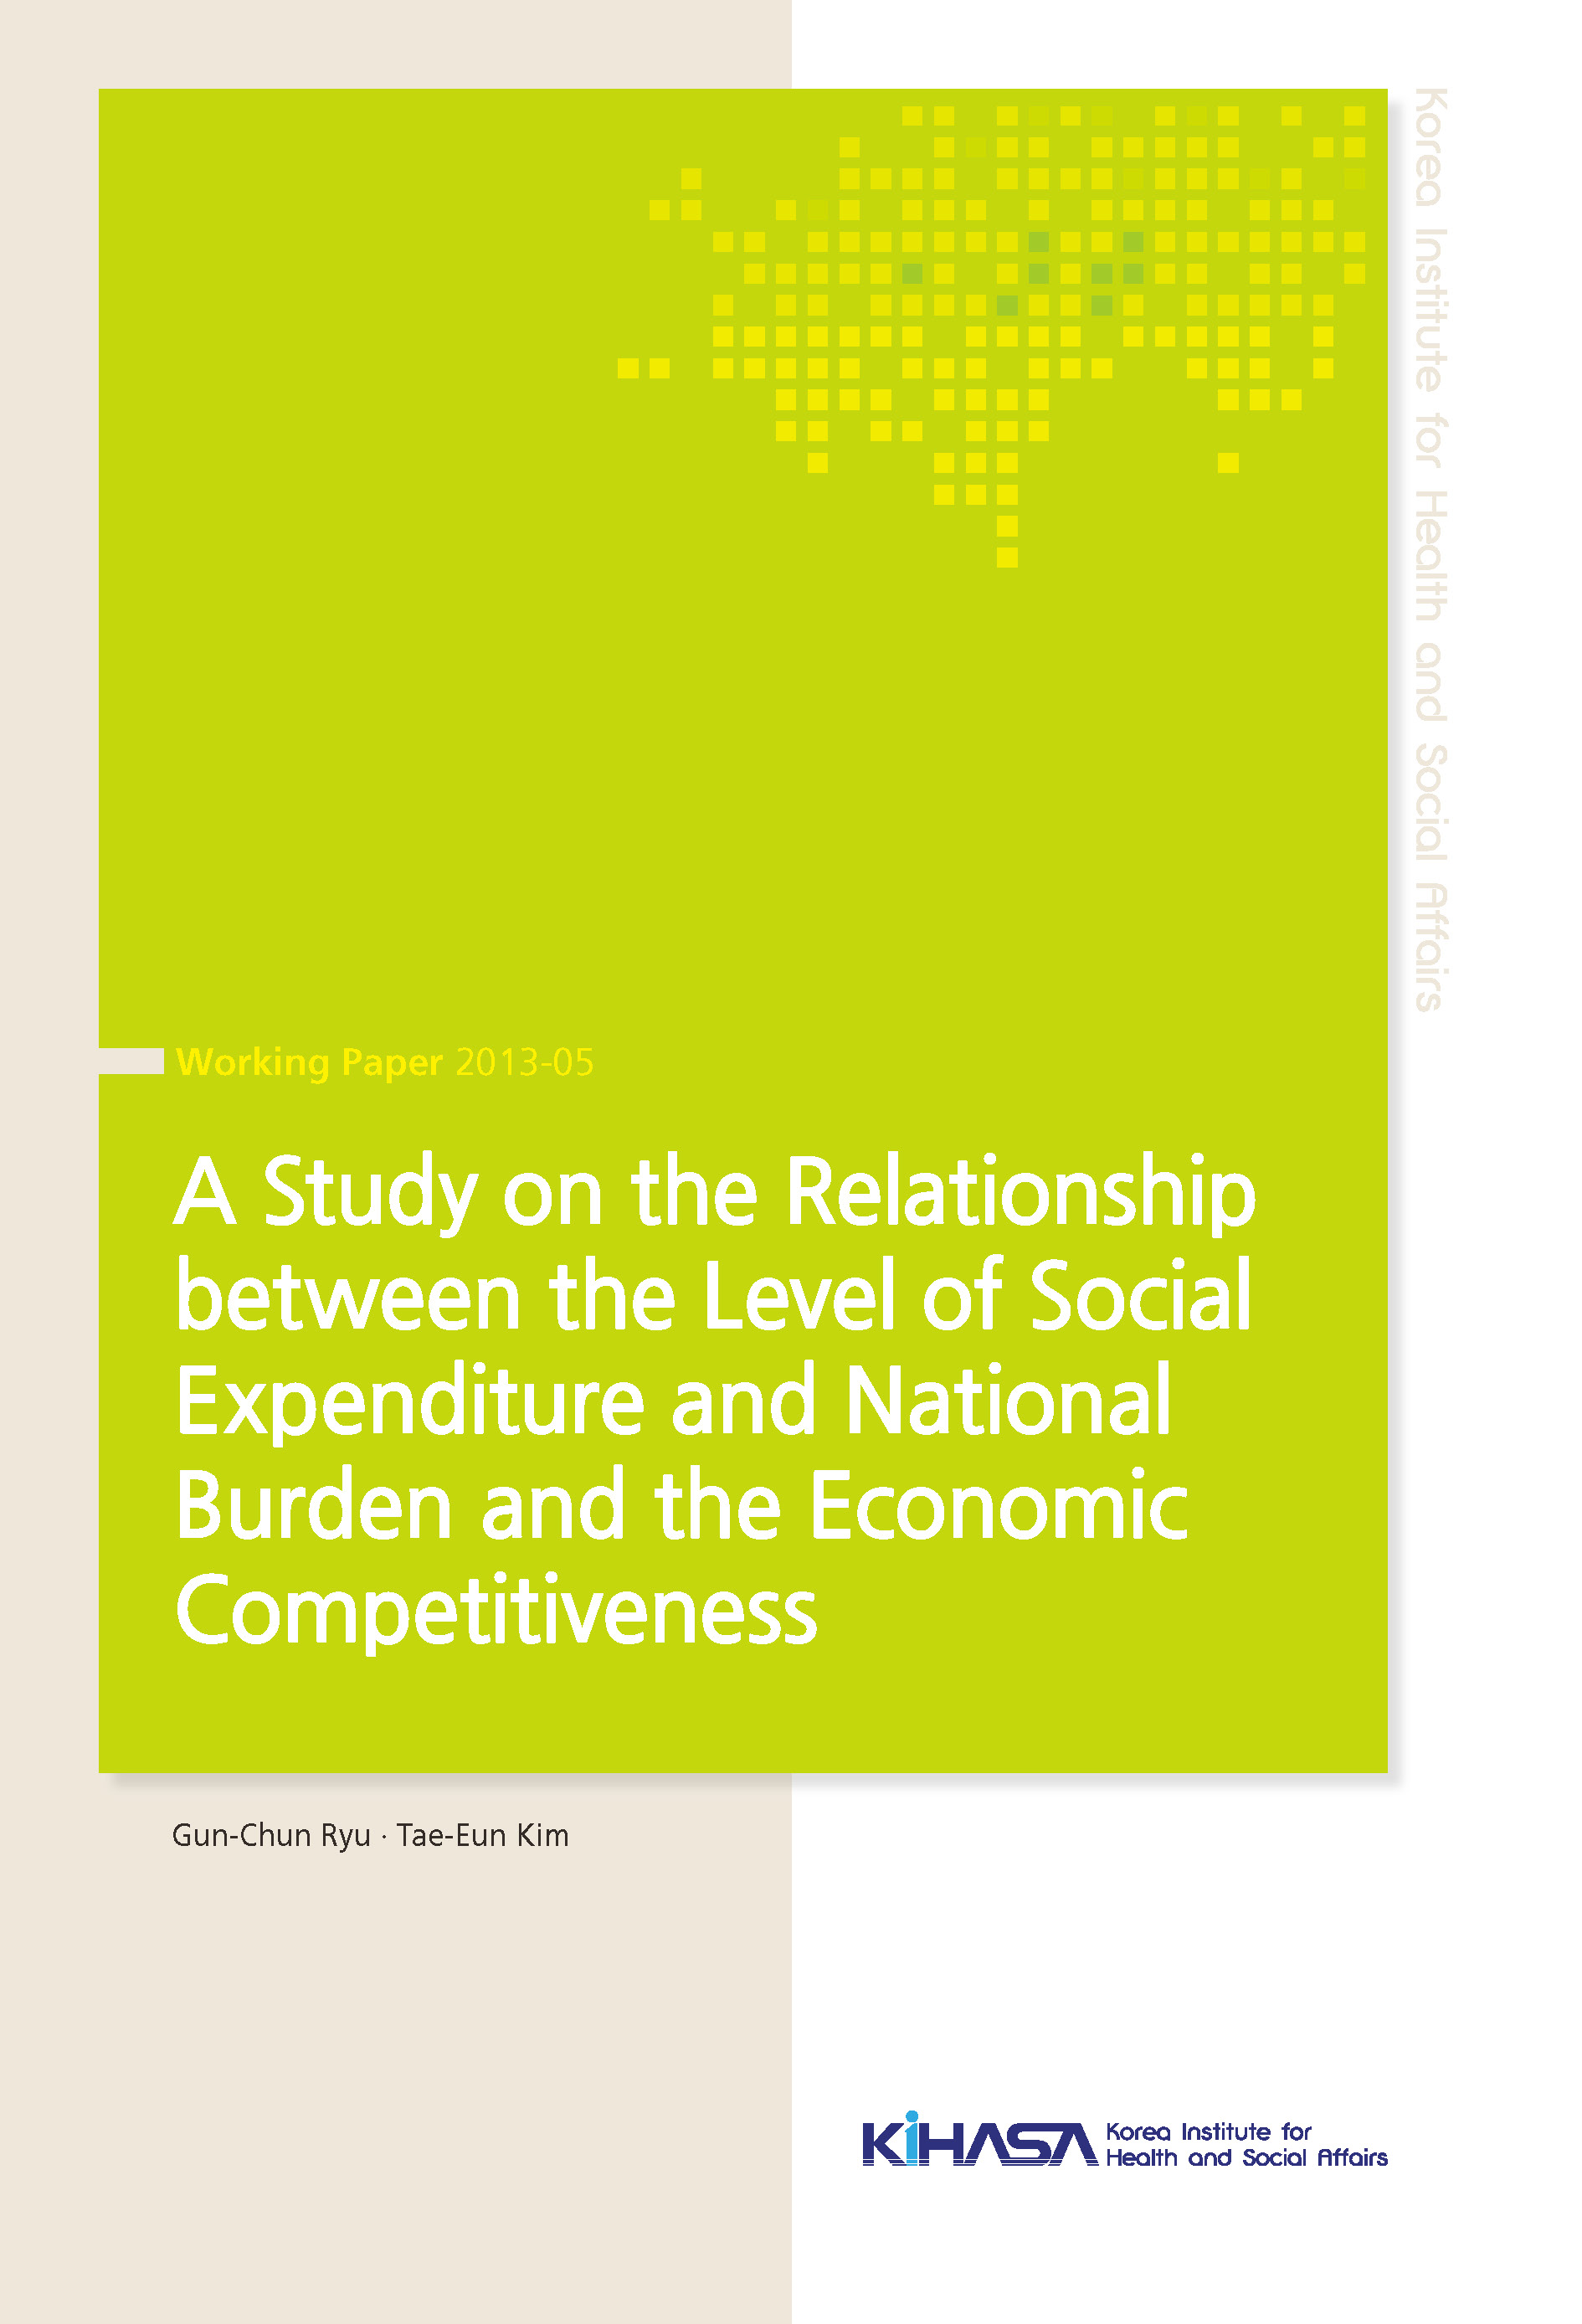 A Study on the Relationship between the Level of Social Expenditure and National Burden and the Economic Competitiveness